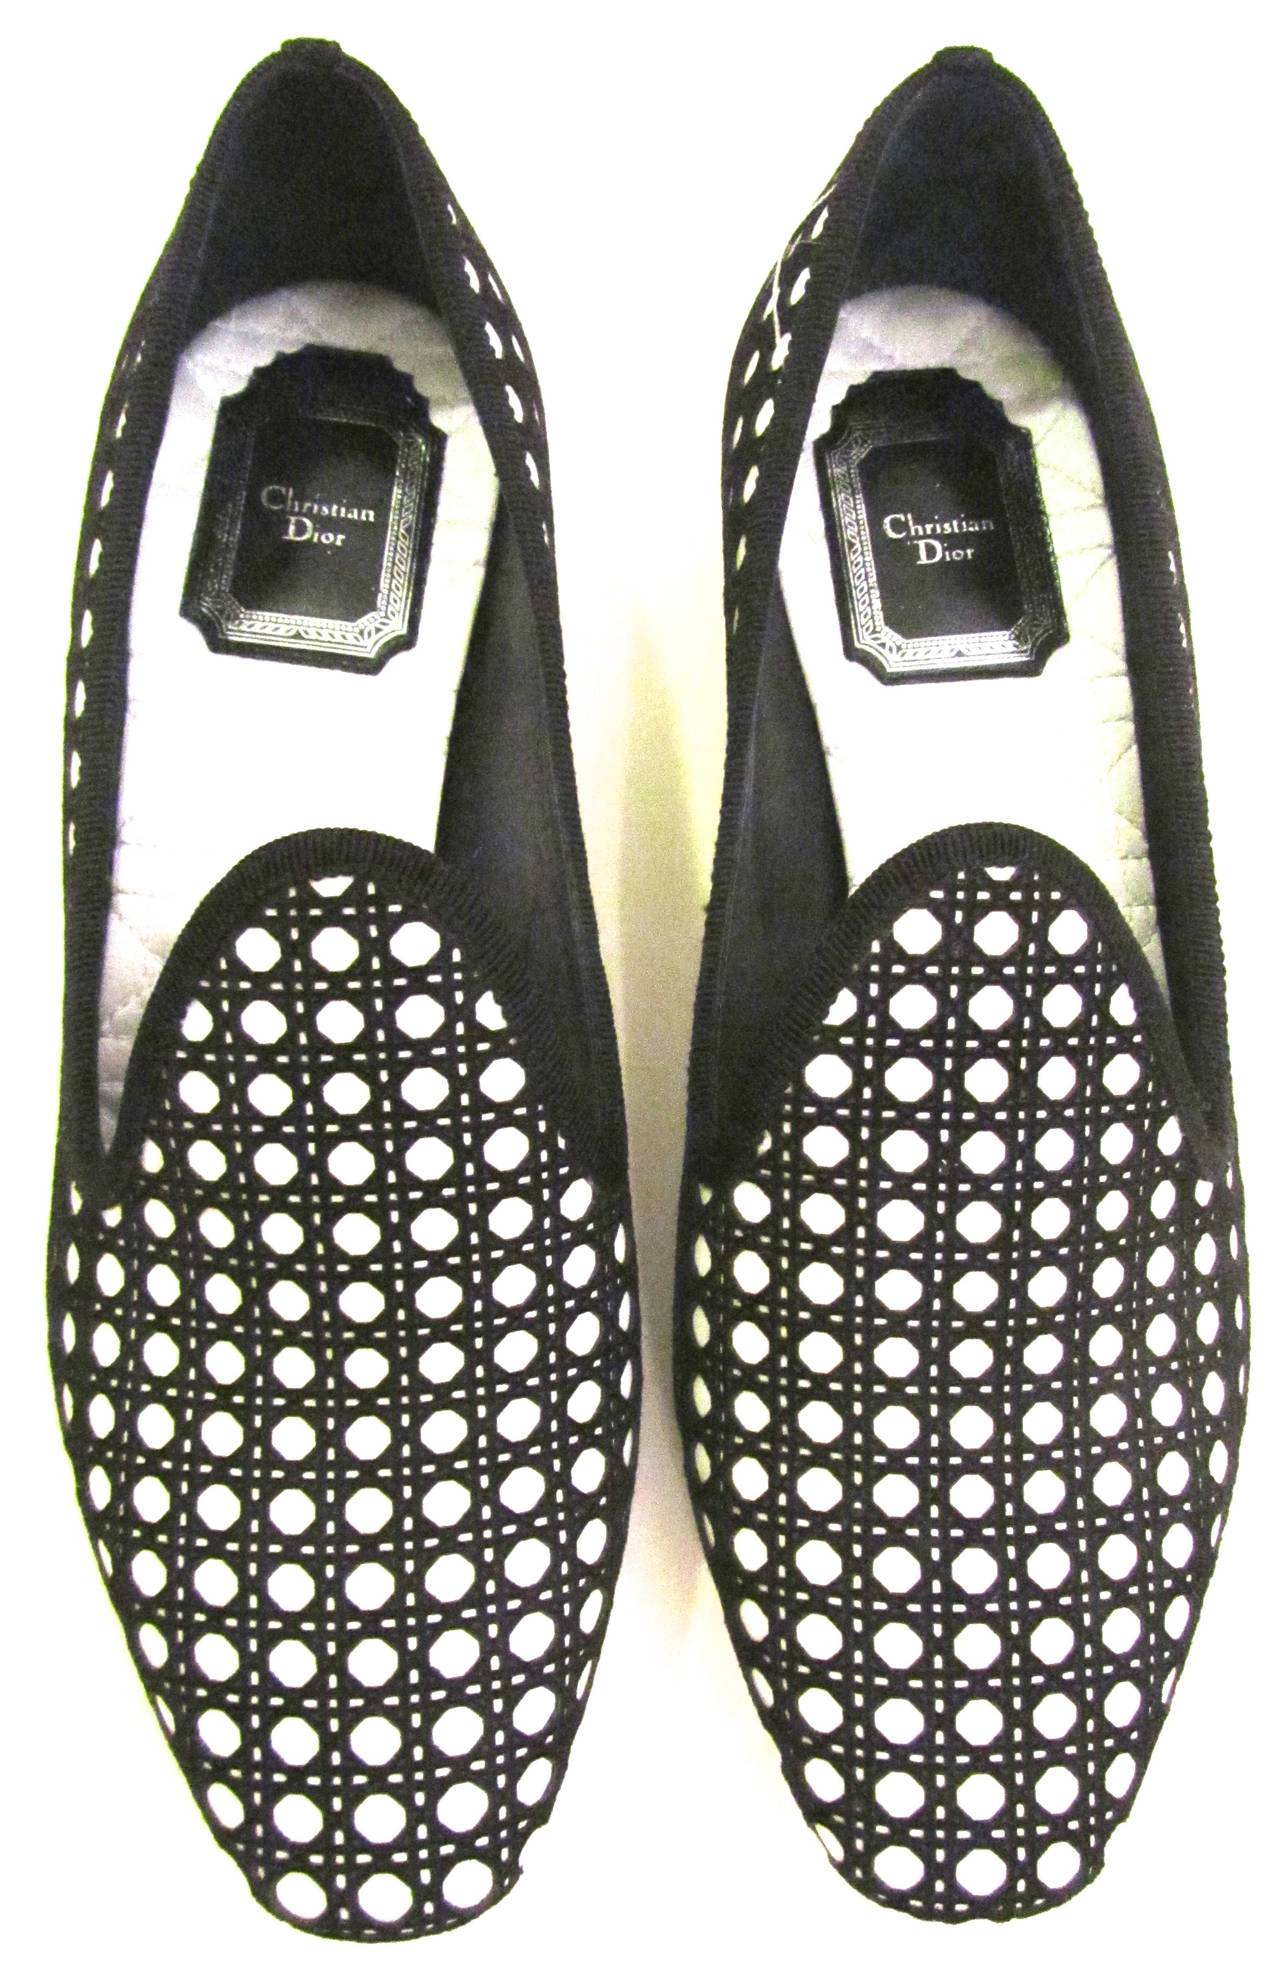 dior black and white shoes